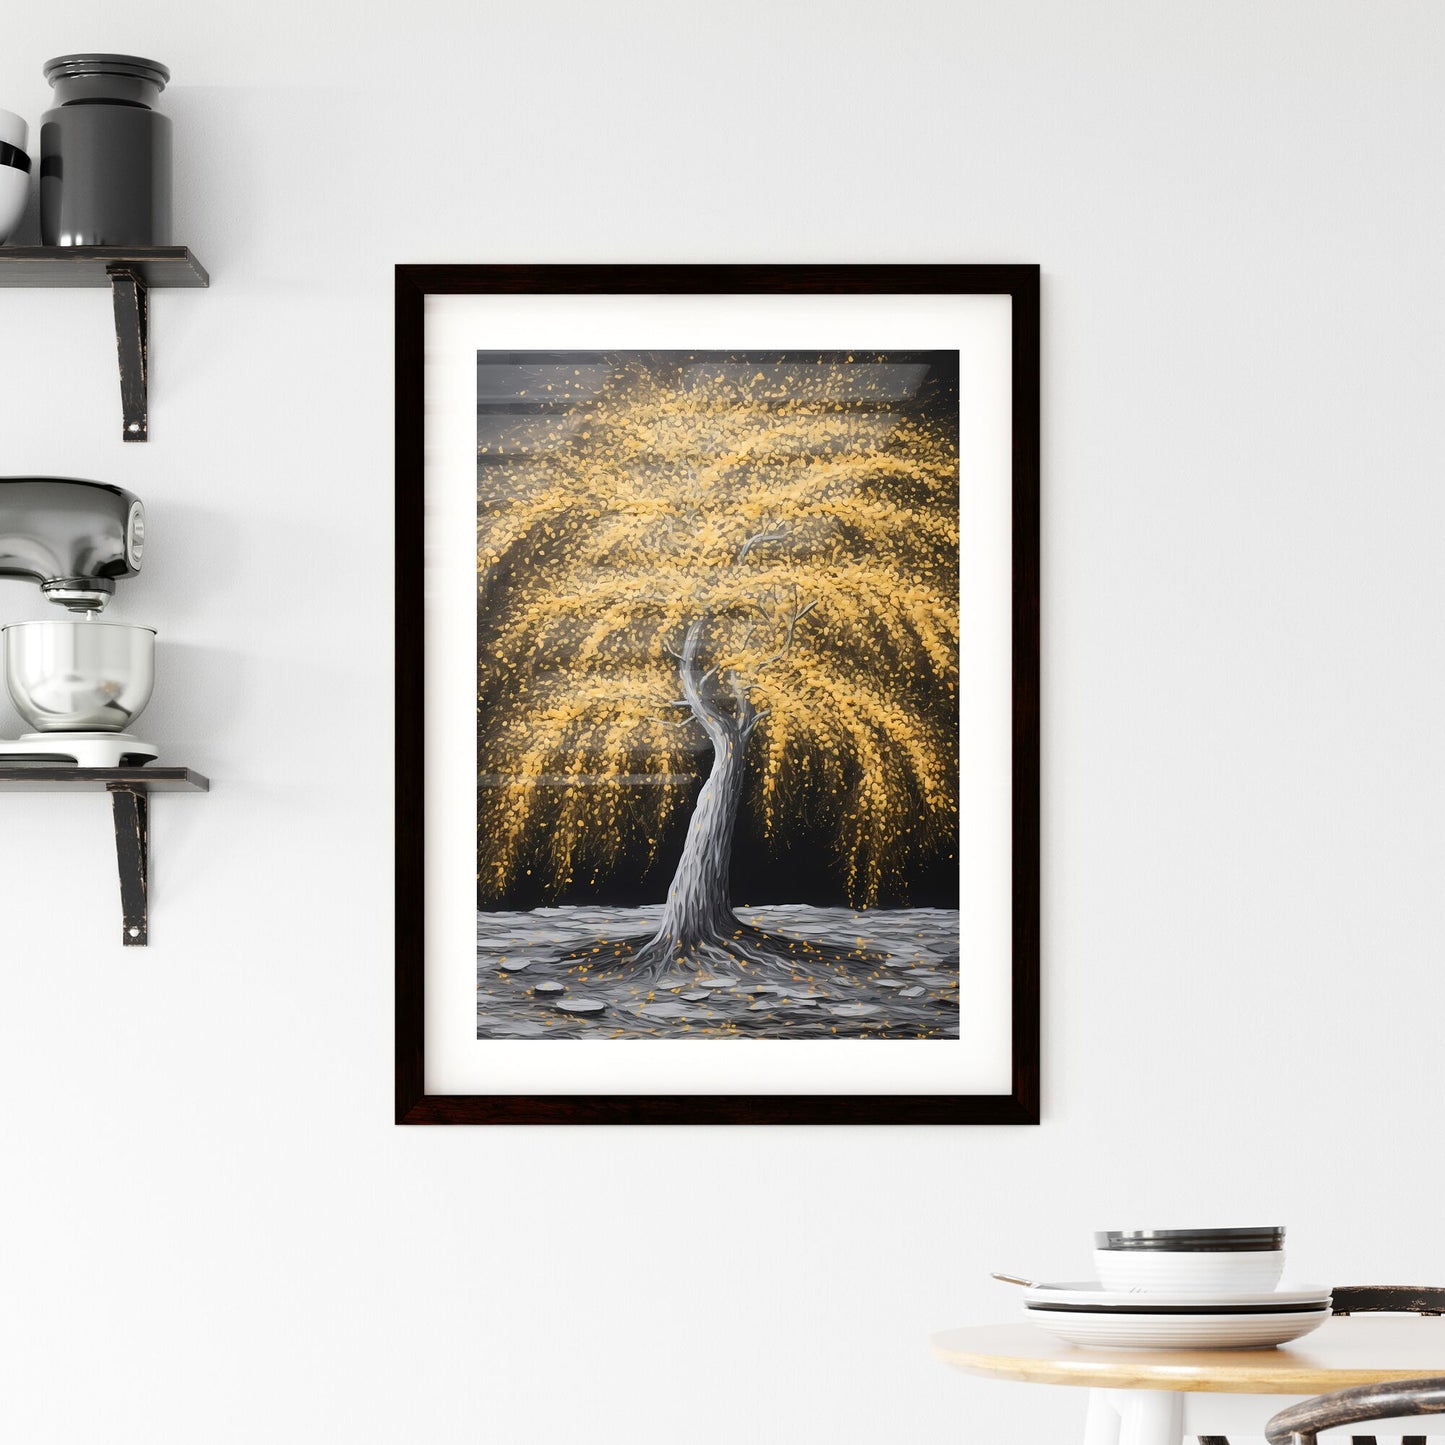 A Poster of an acrylic painting of a yellow willow tree - A Tree With Yellow Leaves Default Title